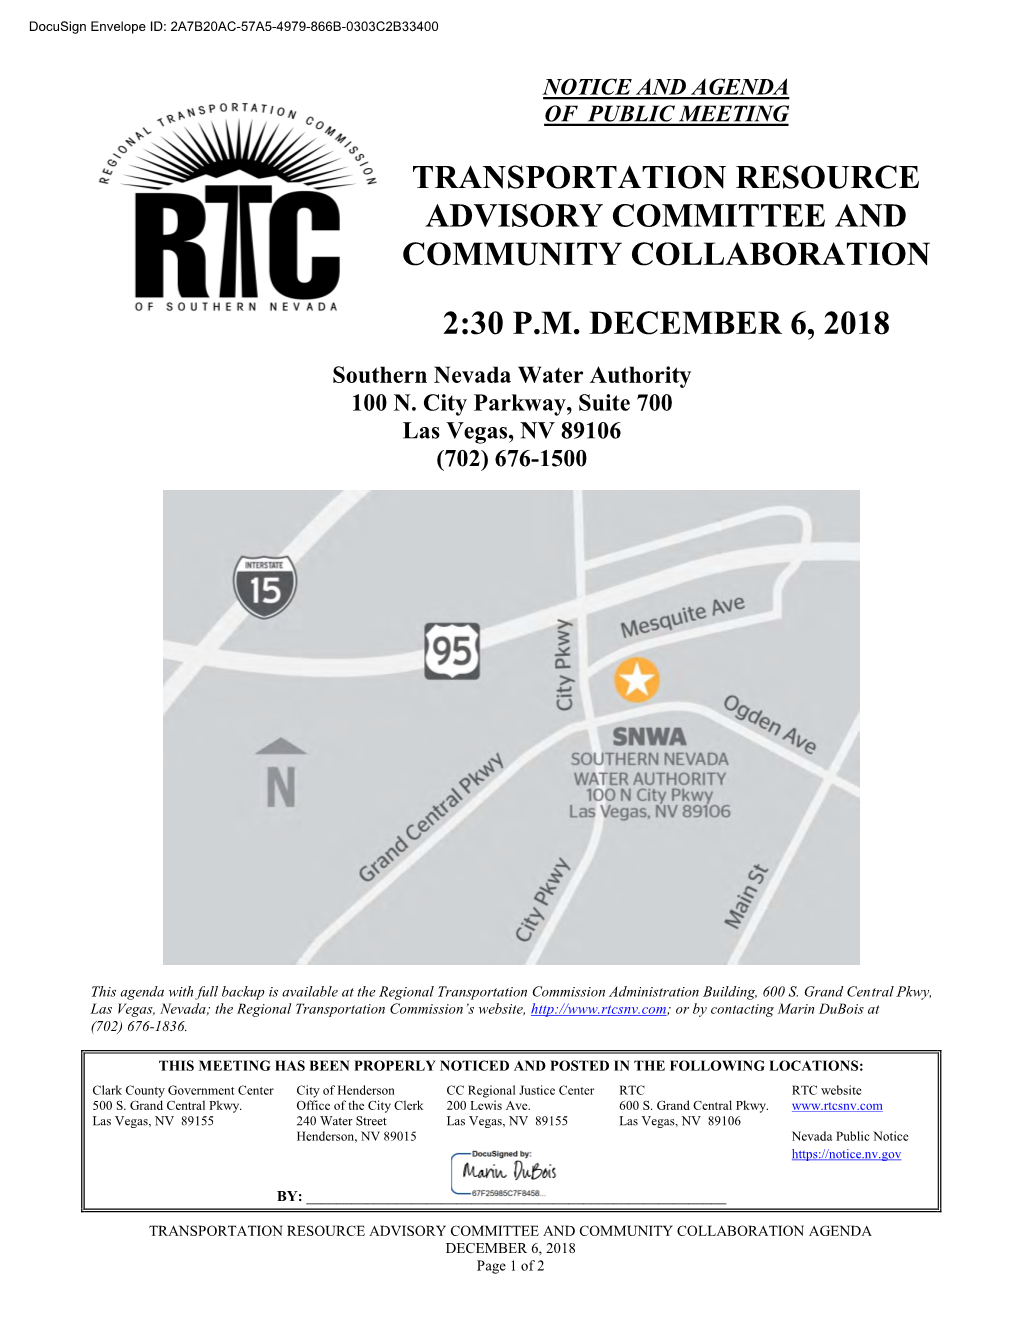 Transportation Resource Advisory Committee and Community Collaboration